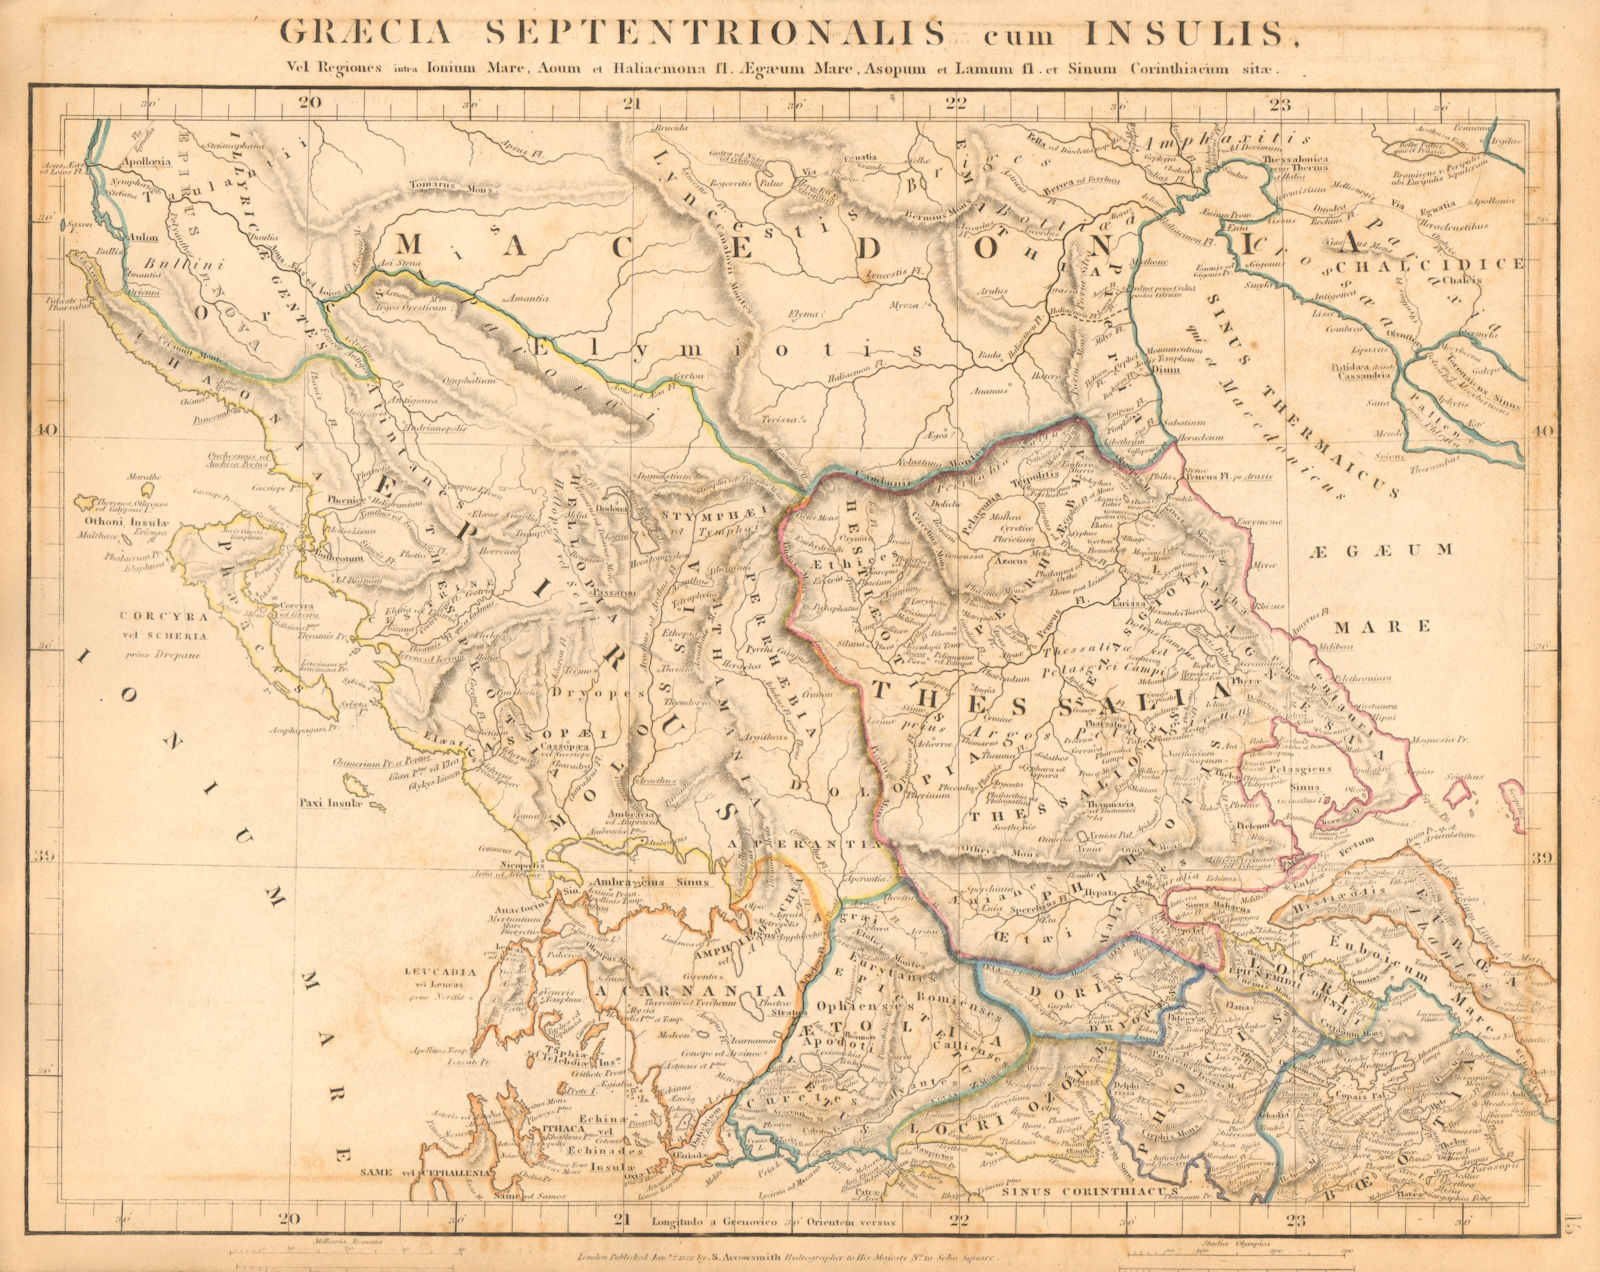 Associate Product GRAECIA SEPTENTRIONALIS. Ancient Northern Greece. ARROWSMITH 1828 old map